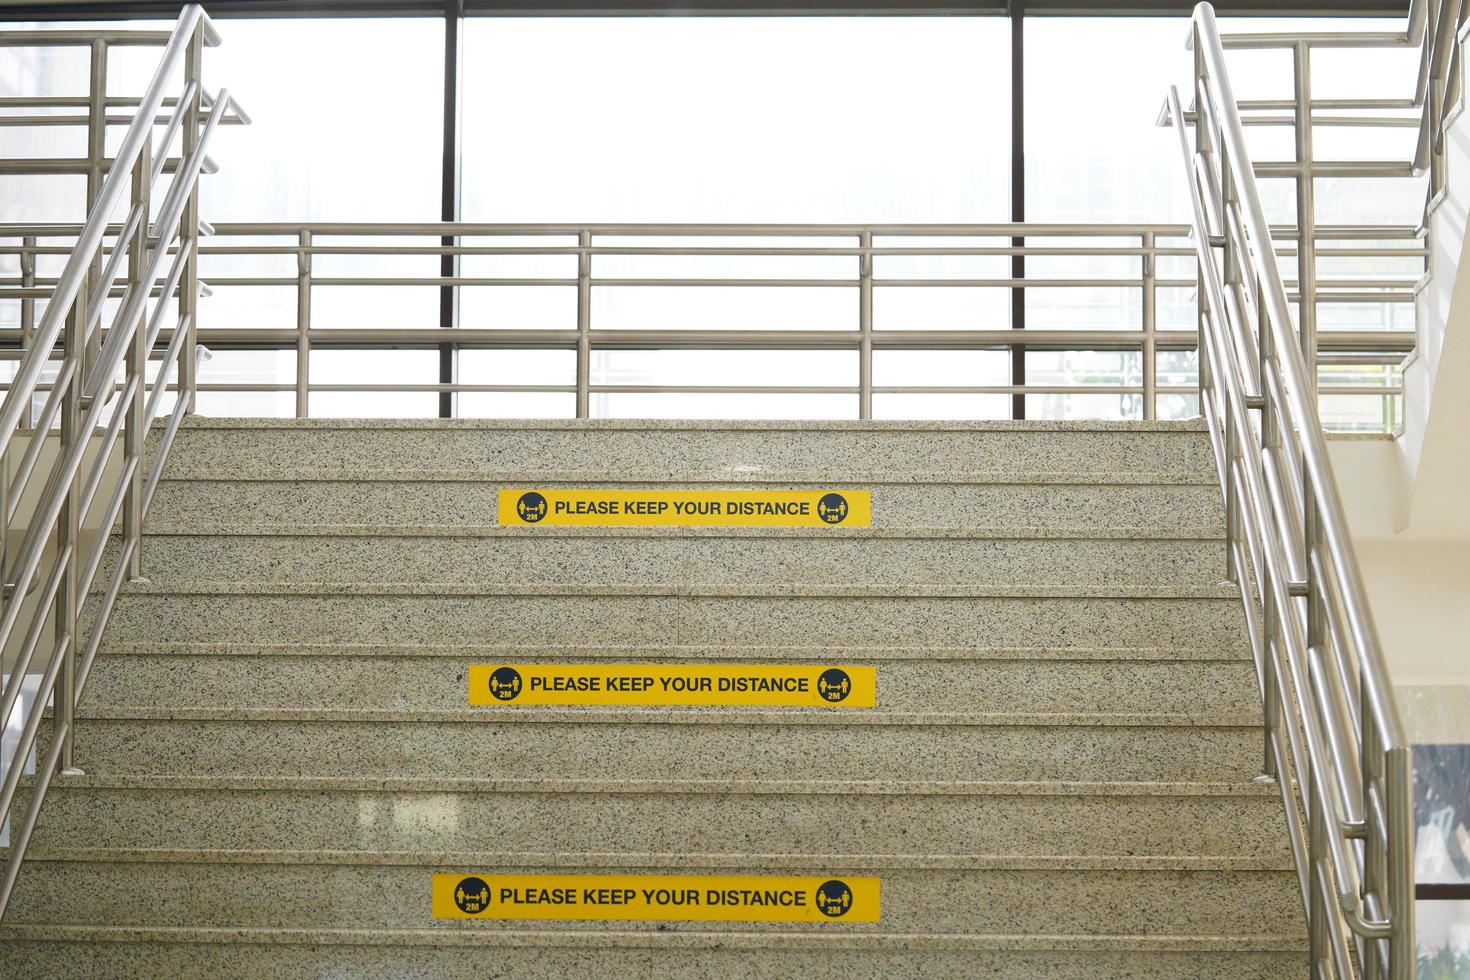 Please keep your distance label on the university stairs or building. real distance label.rectangle yellow labels. photo